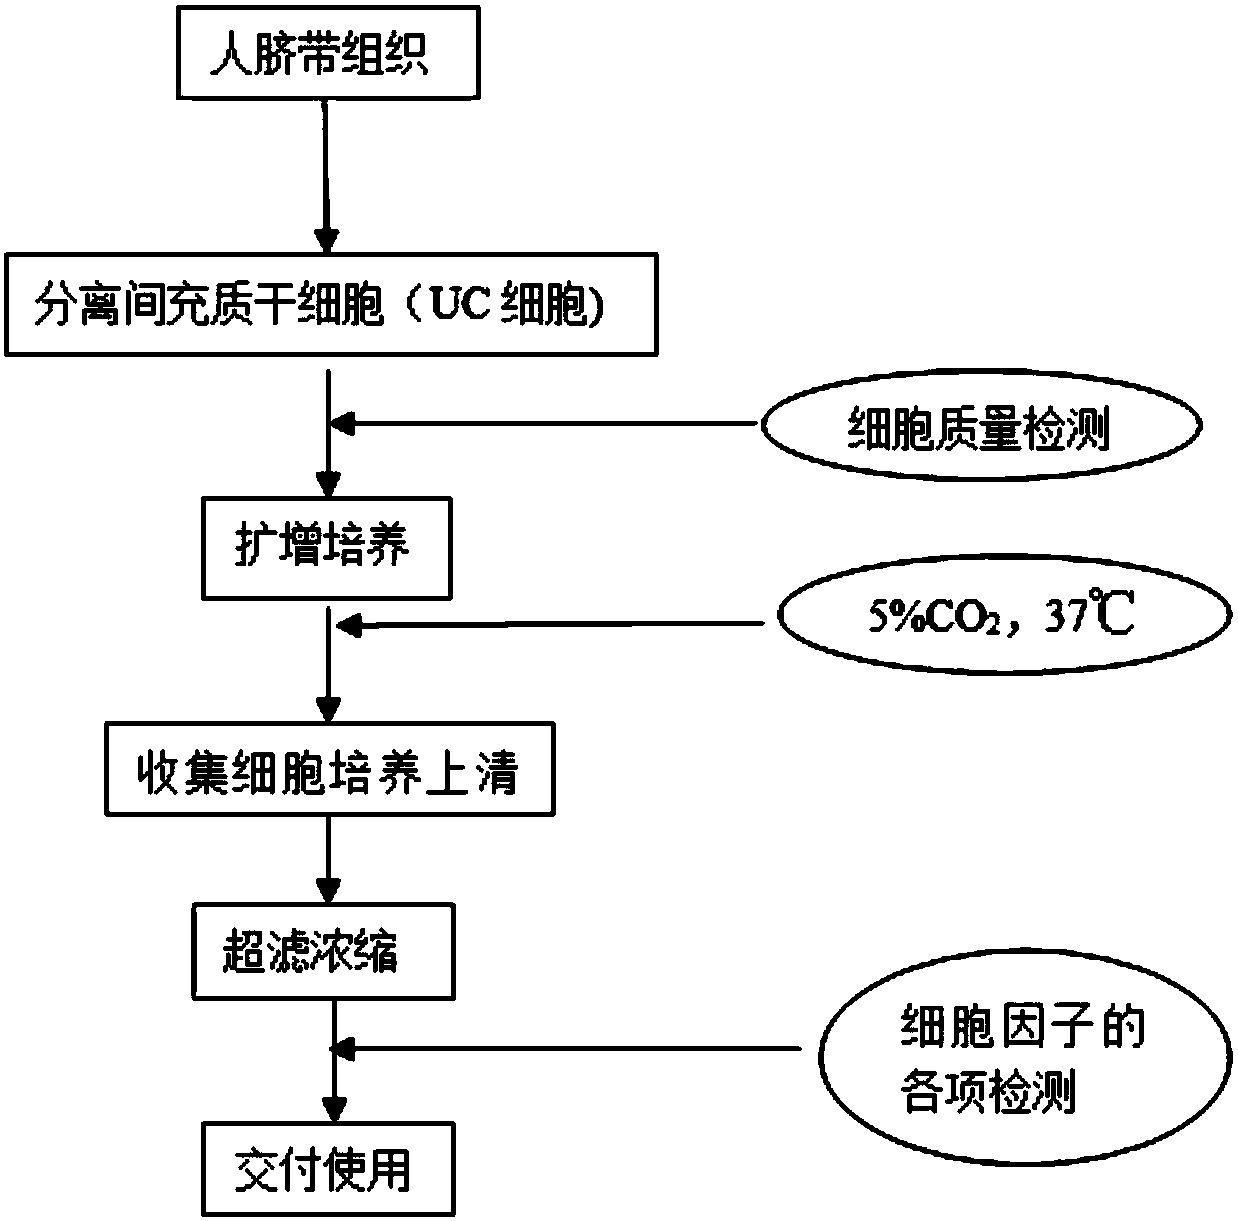 Preparation method and application of human umbilical cord mesenchymal stem cell cytokines